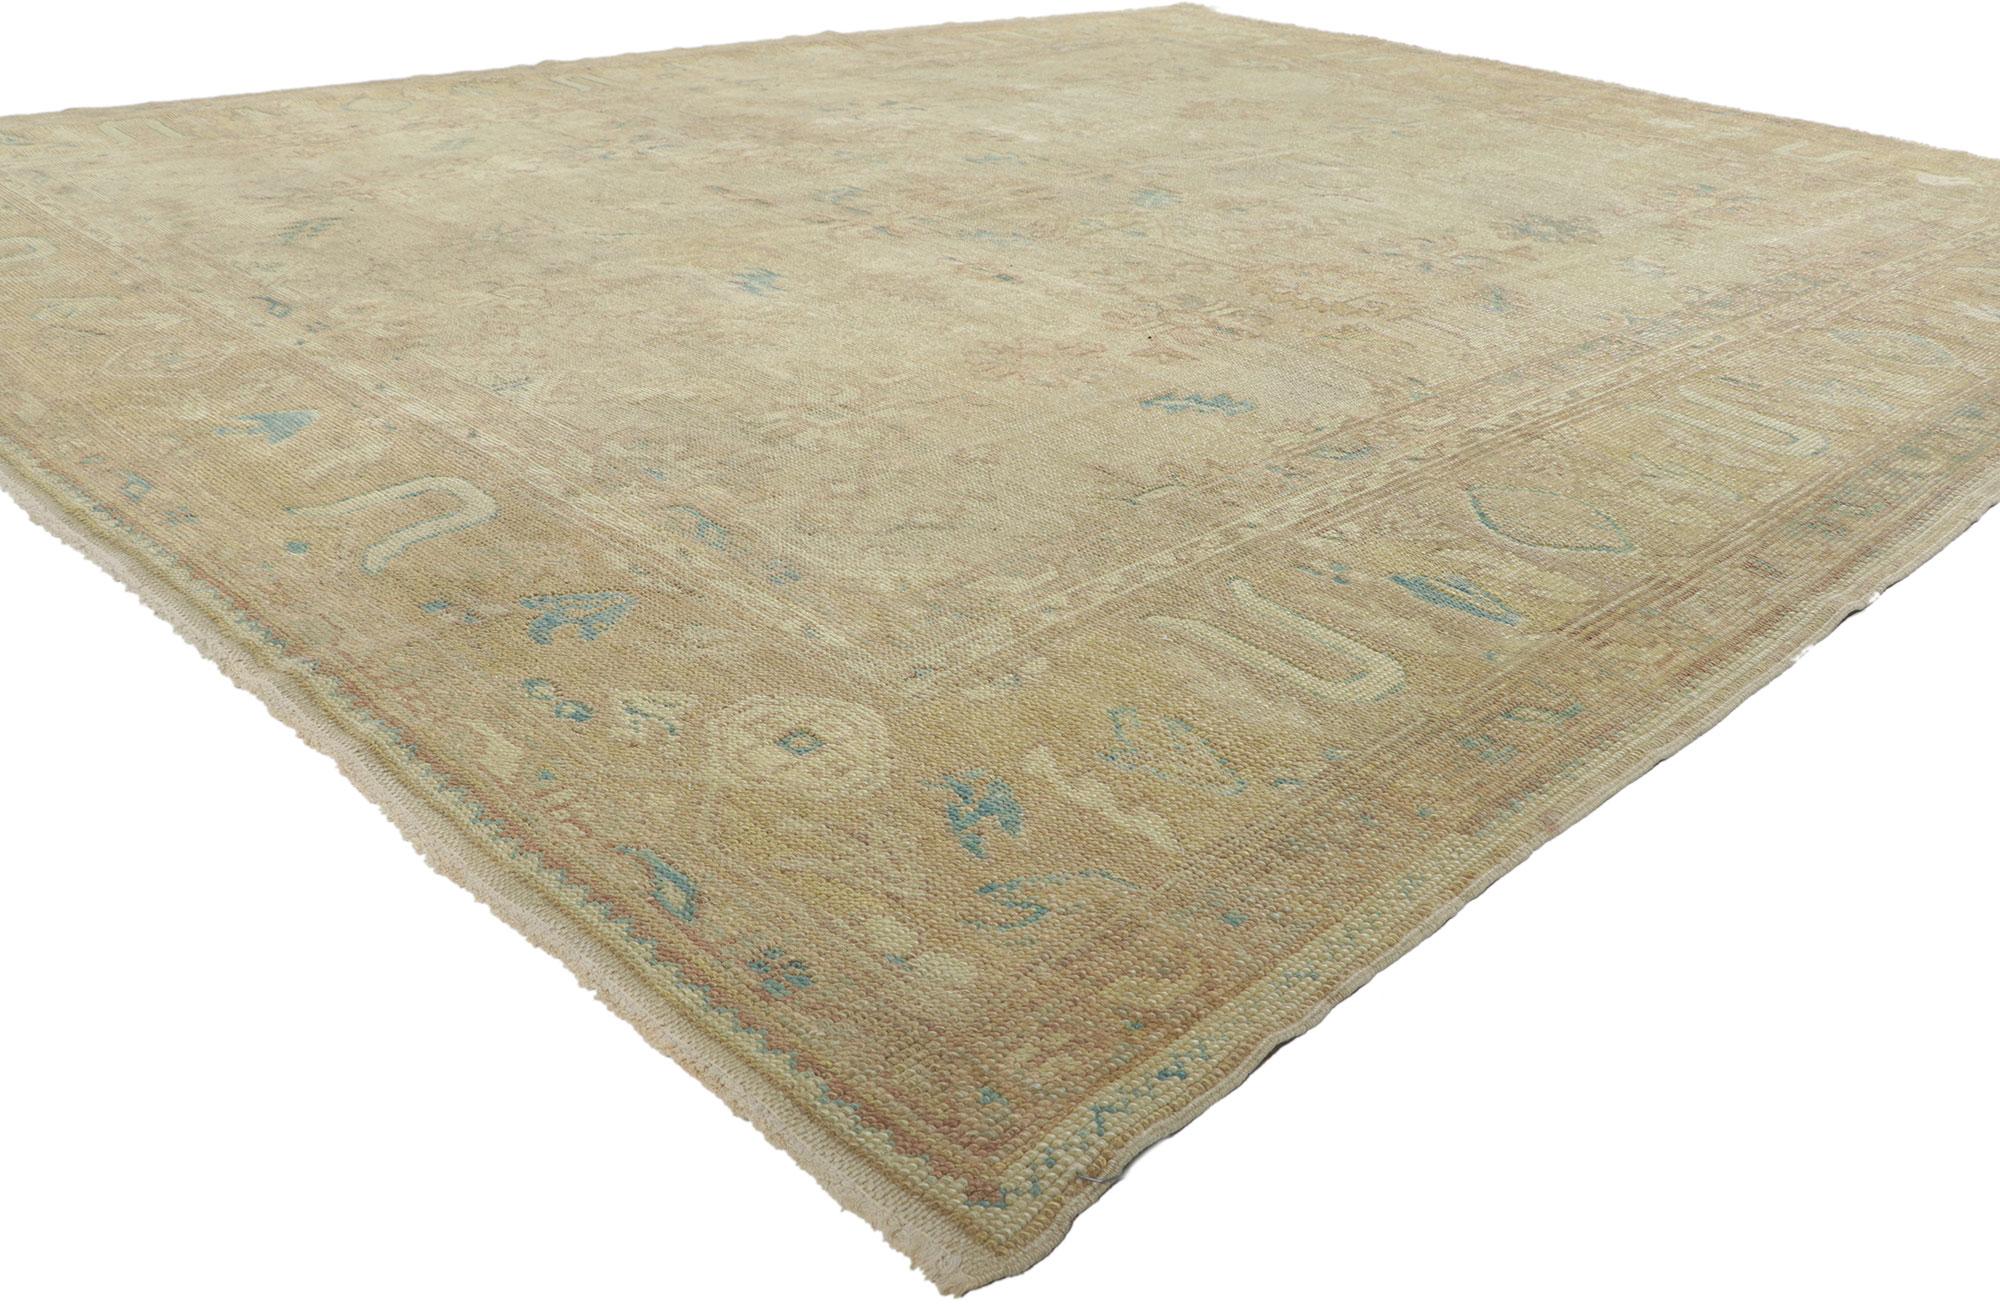 51629 New Turkish Oushak Rug, 08’07 x 10’04. 
Emanating vintage charm with incredible detail and texture, this hand knotted wool Turkish Oushak rug is a captivating vision of woven beauty. The intricate botanical design and soft earth-tone colors